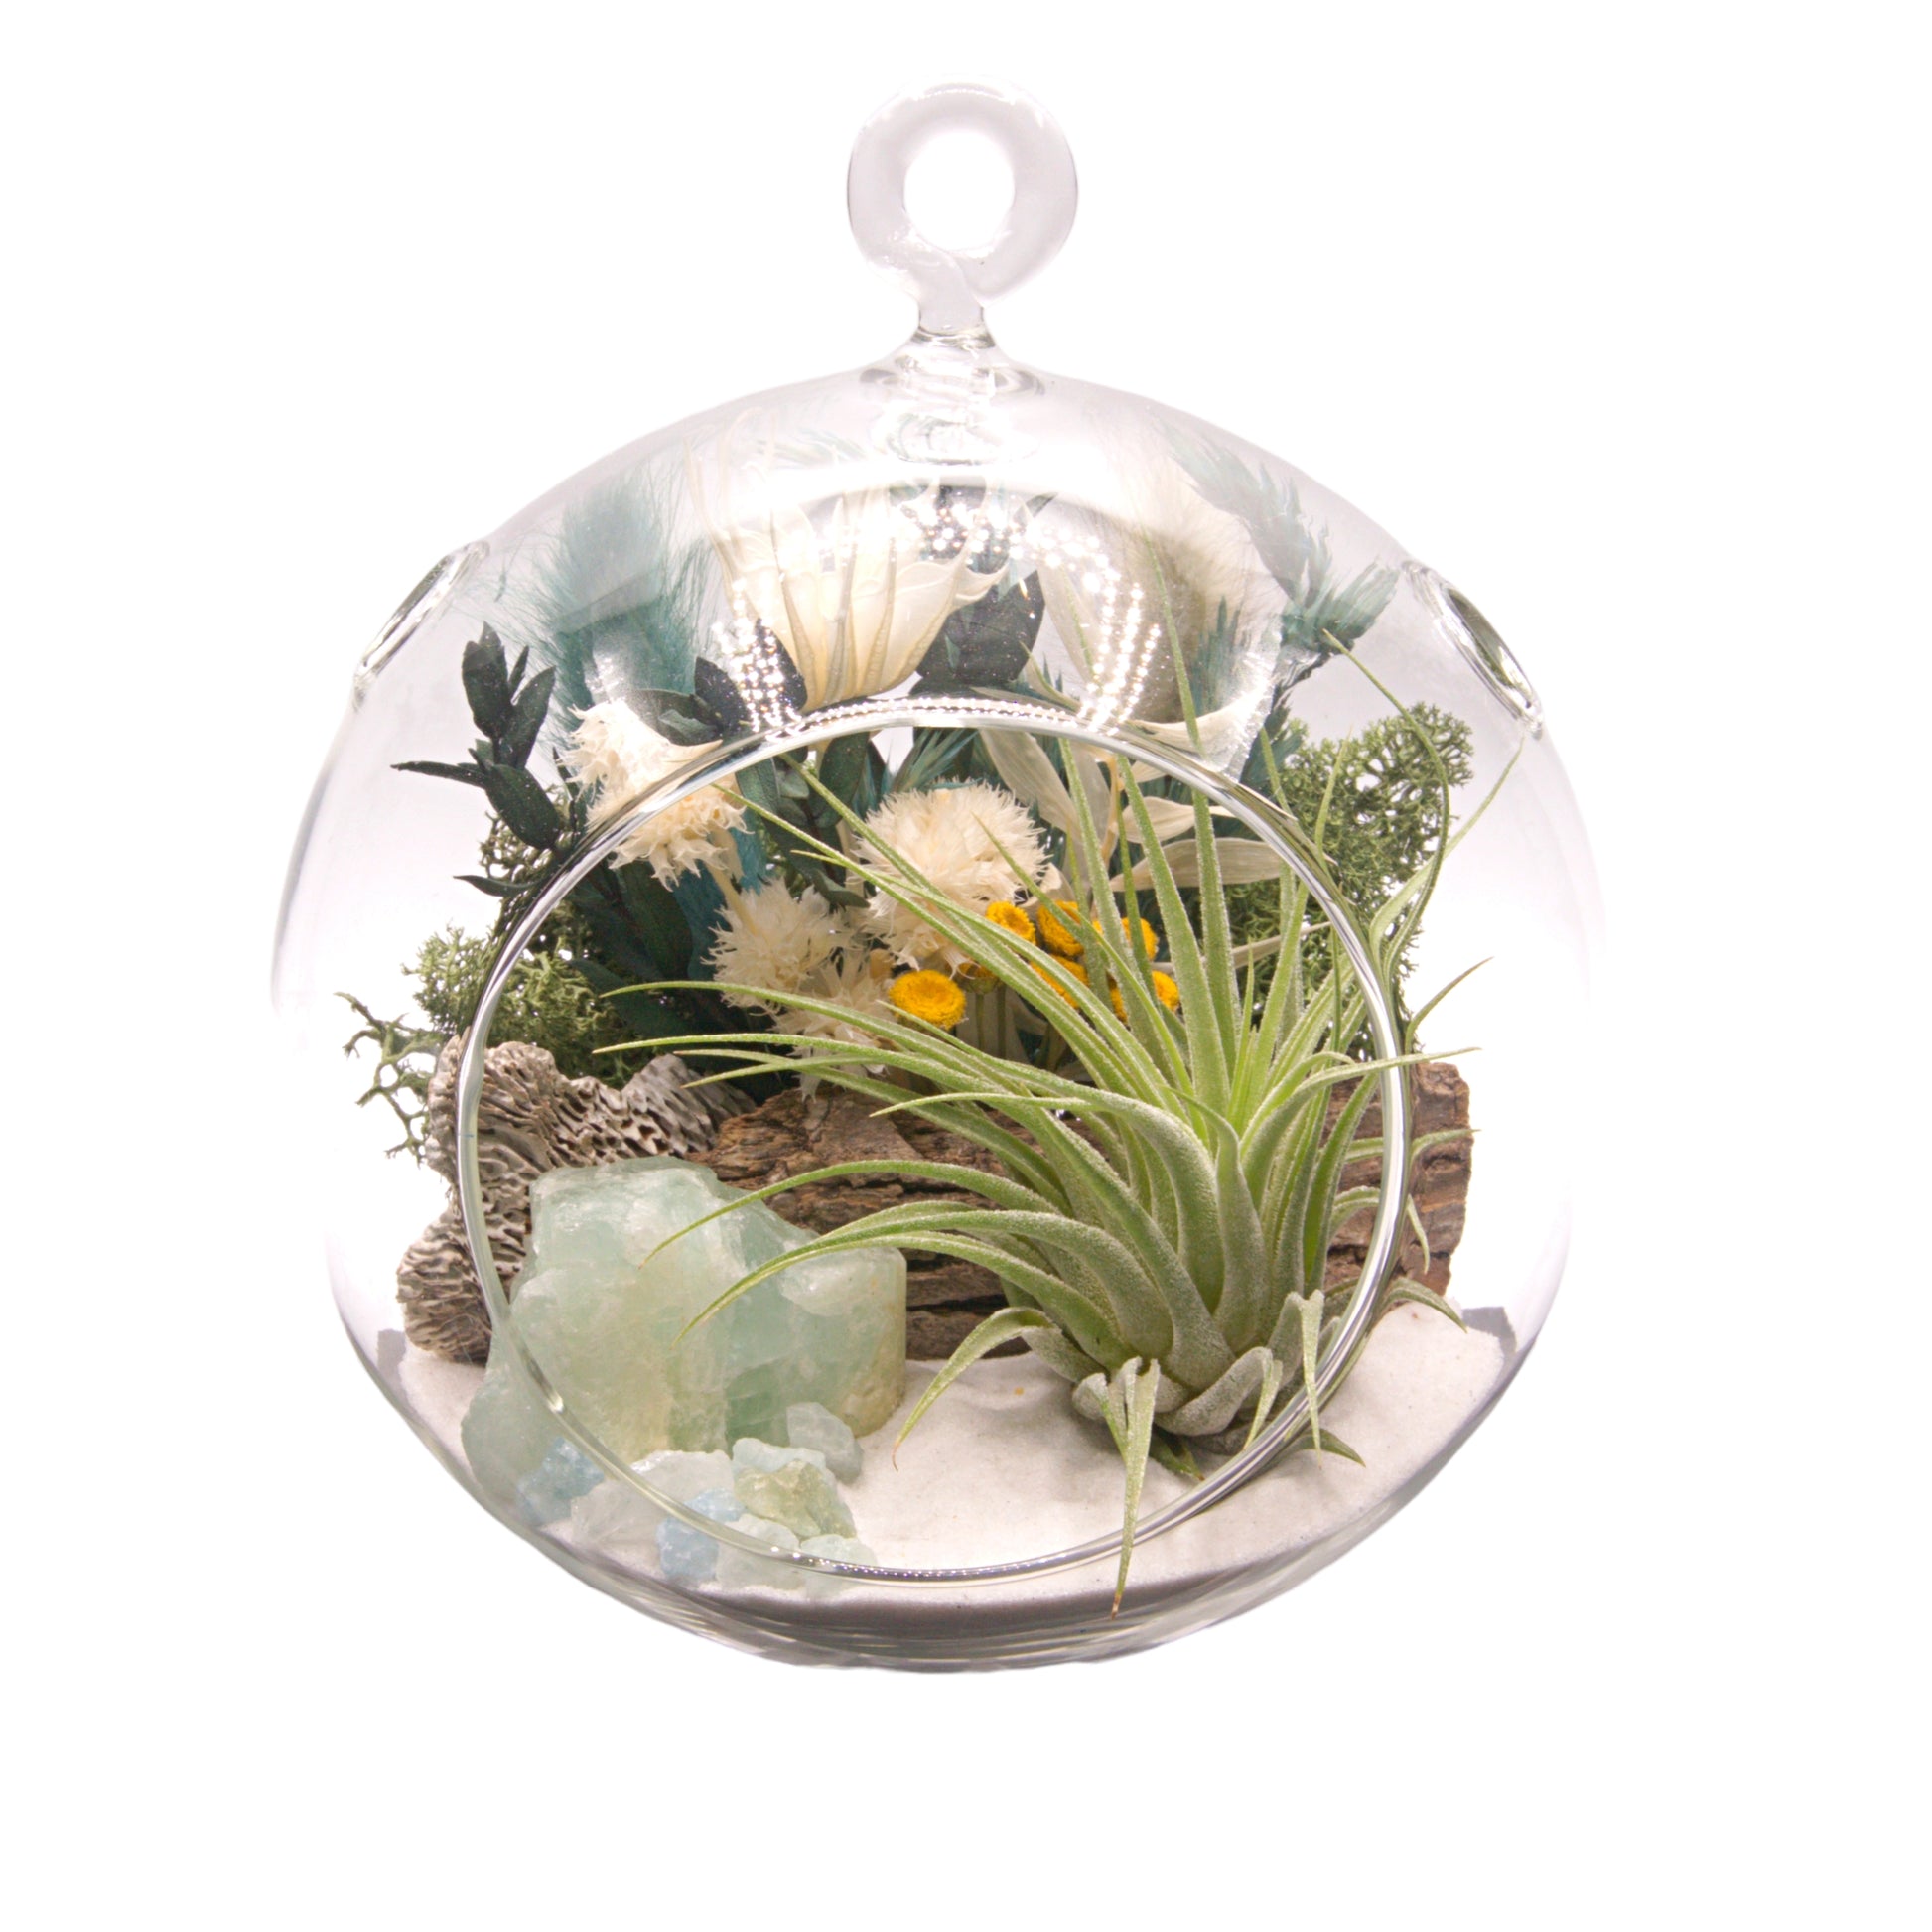 Glass bubble terrarium with airplant, dried flowers and aquamarine crystals